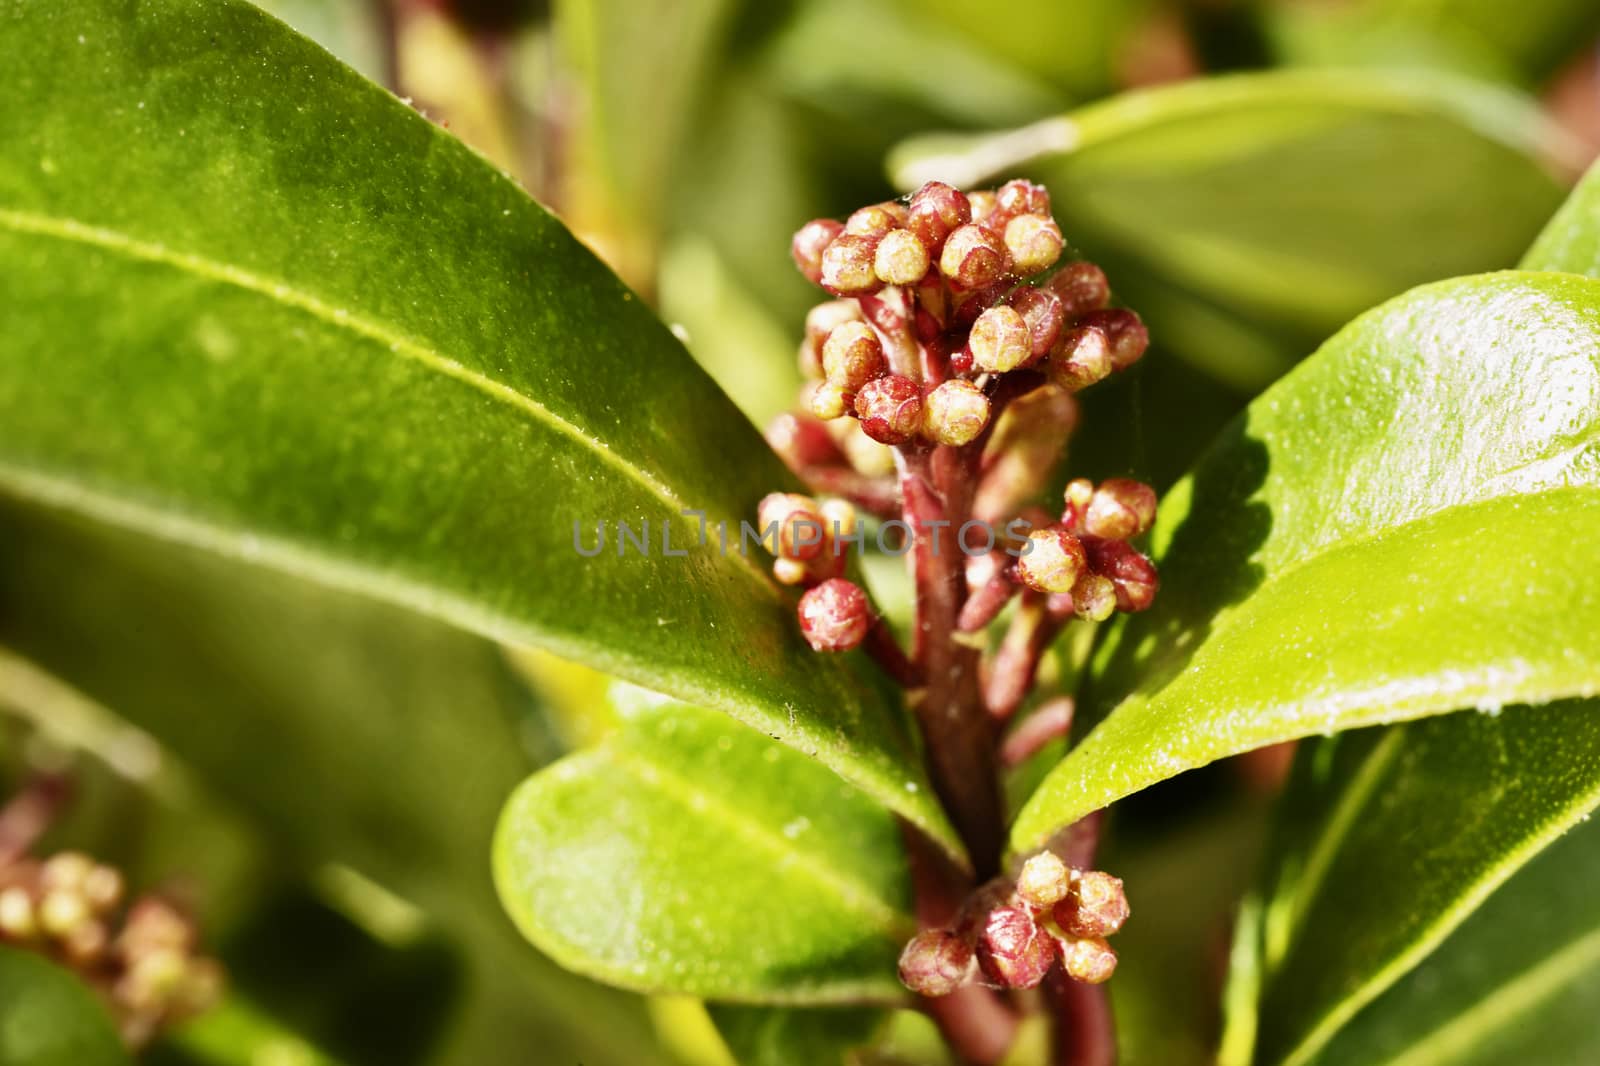 Flowering plant of Japanese skimmia , green glossy leaves with round red fruits in a bright sunny day